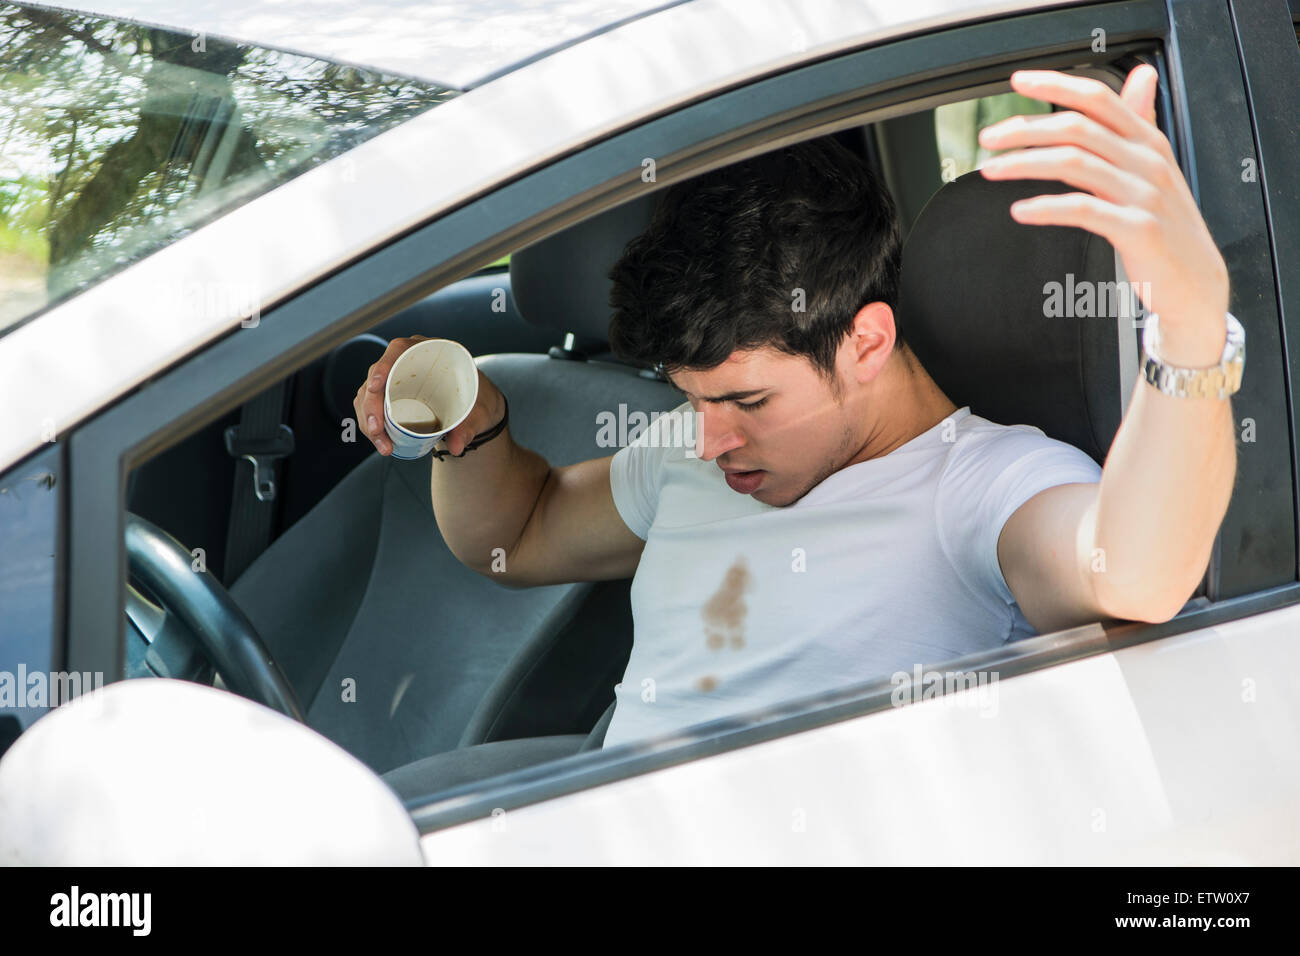 Young Man Having a Bad Day, Distracted Driver Looking Down in Frustration at Spilled Coffee on White T-Shirt While Sitting in Dr Stock Photo